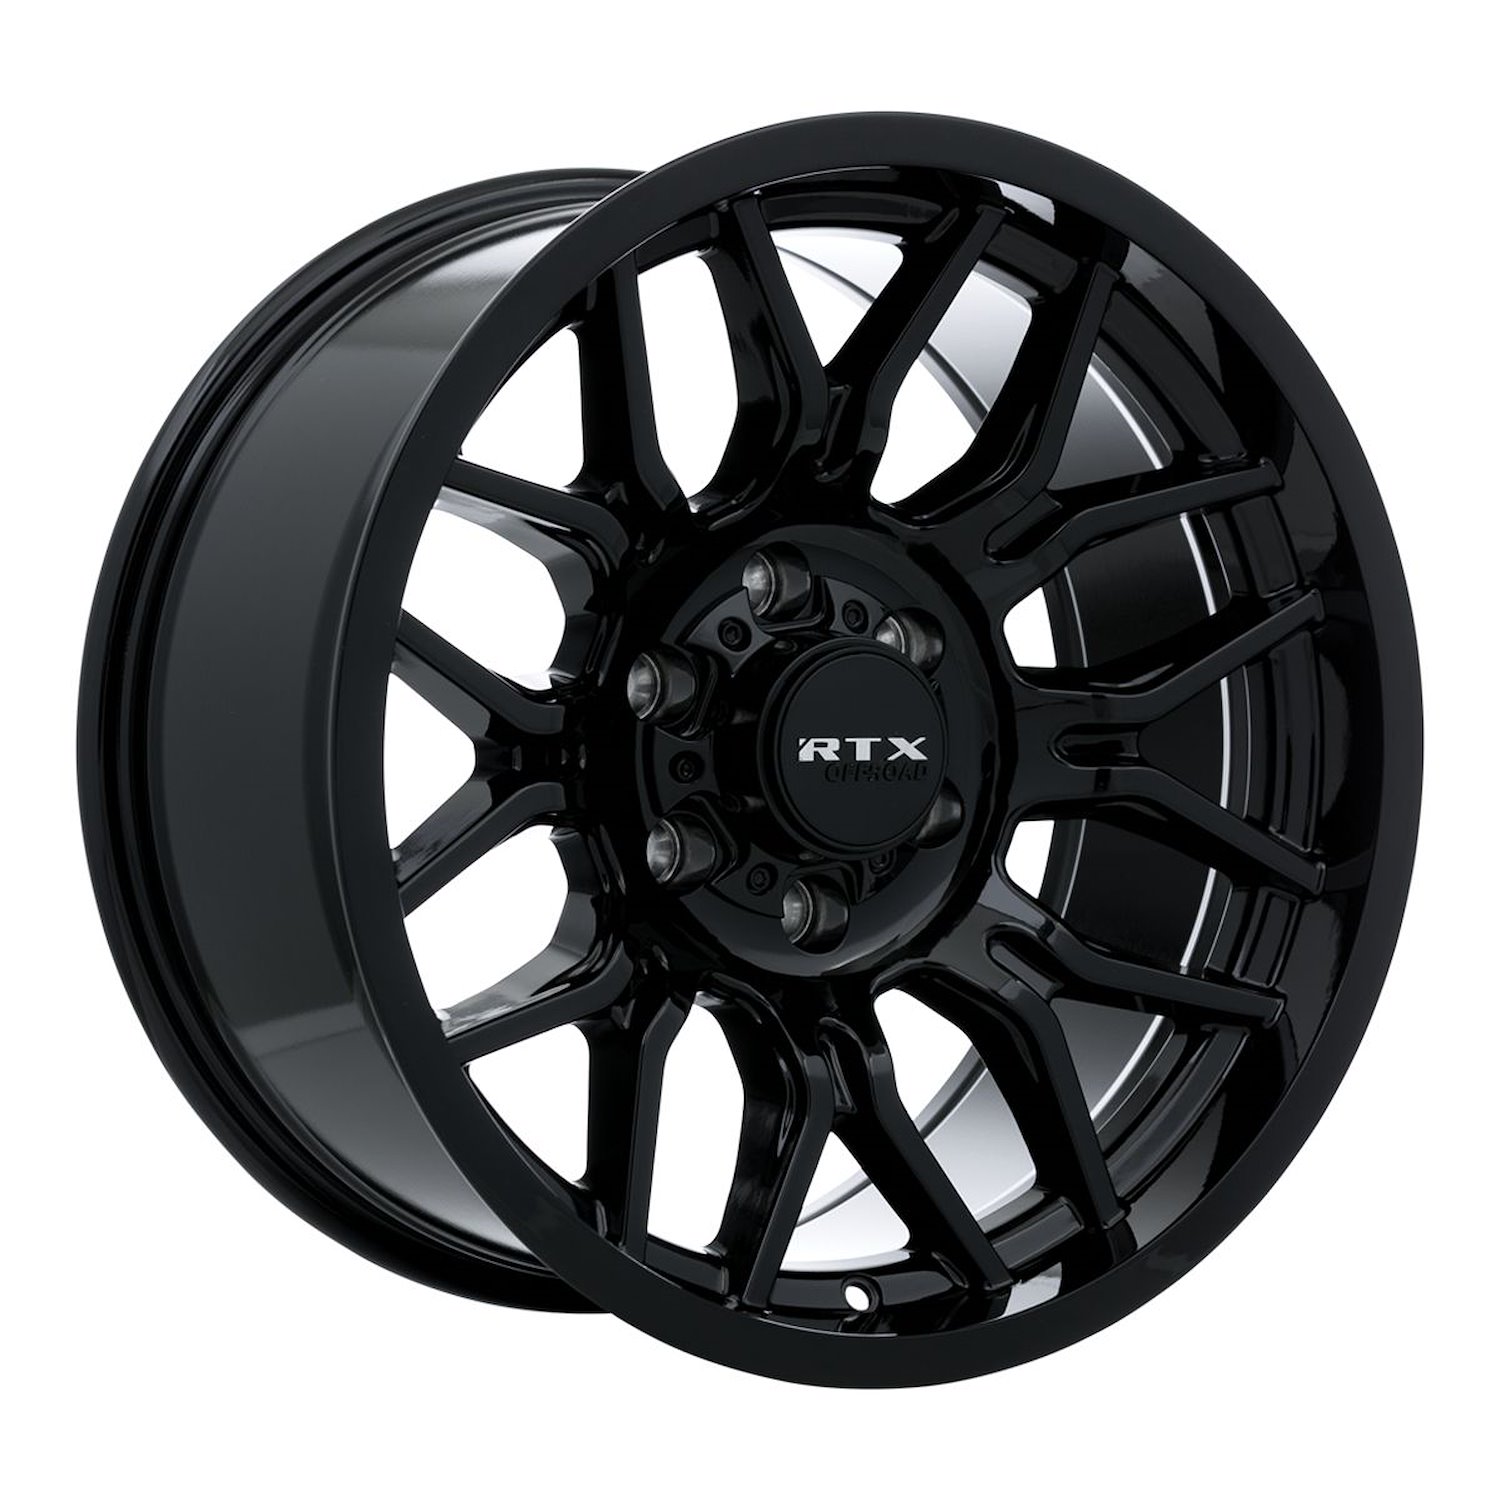 163760 Off-Road Series Claw Wheel [Size: 20" x 9"] Gloss Black Finish